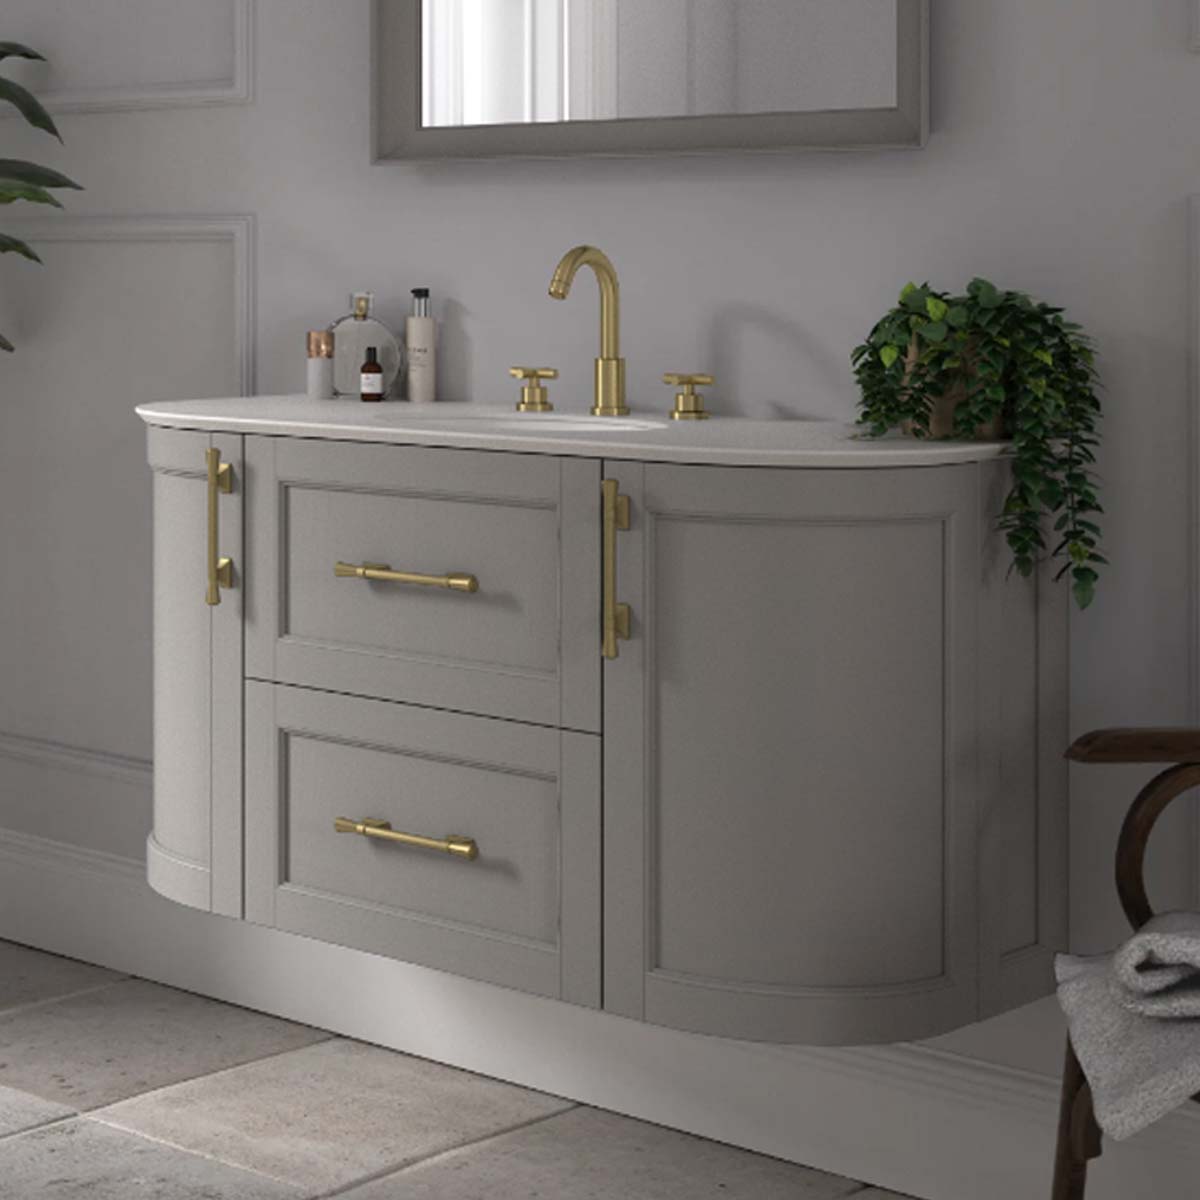 Utopia Roseberry Curved Wall Mounted Vanity Unit With Imperial White Worktop And Solid Surface Undermount Basin Dove Grey